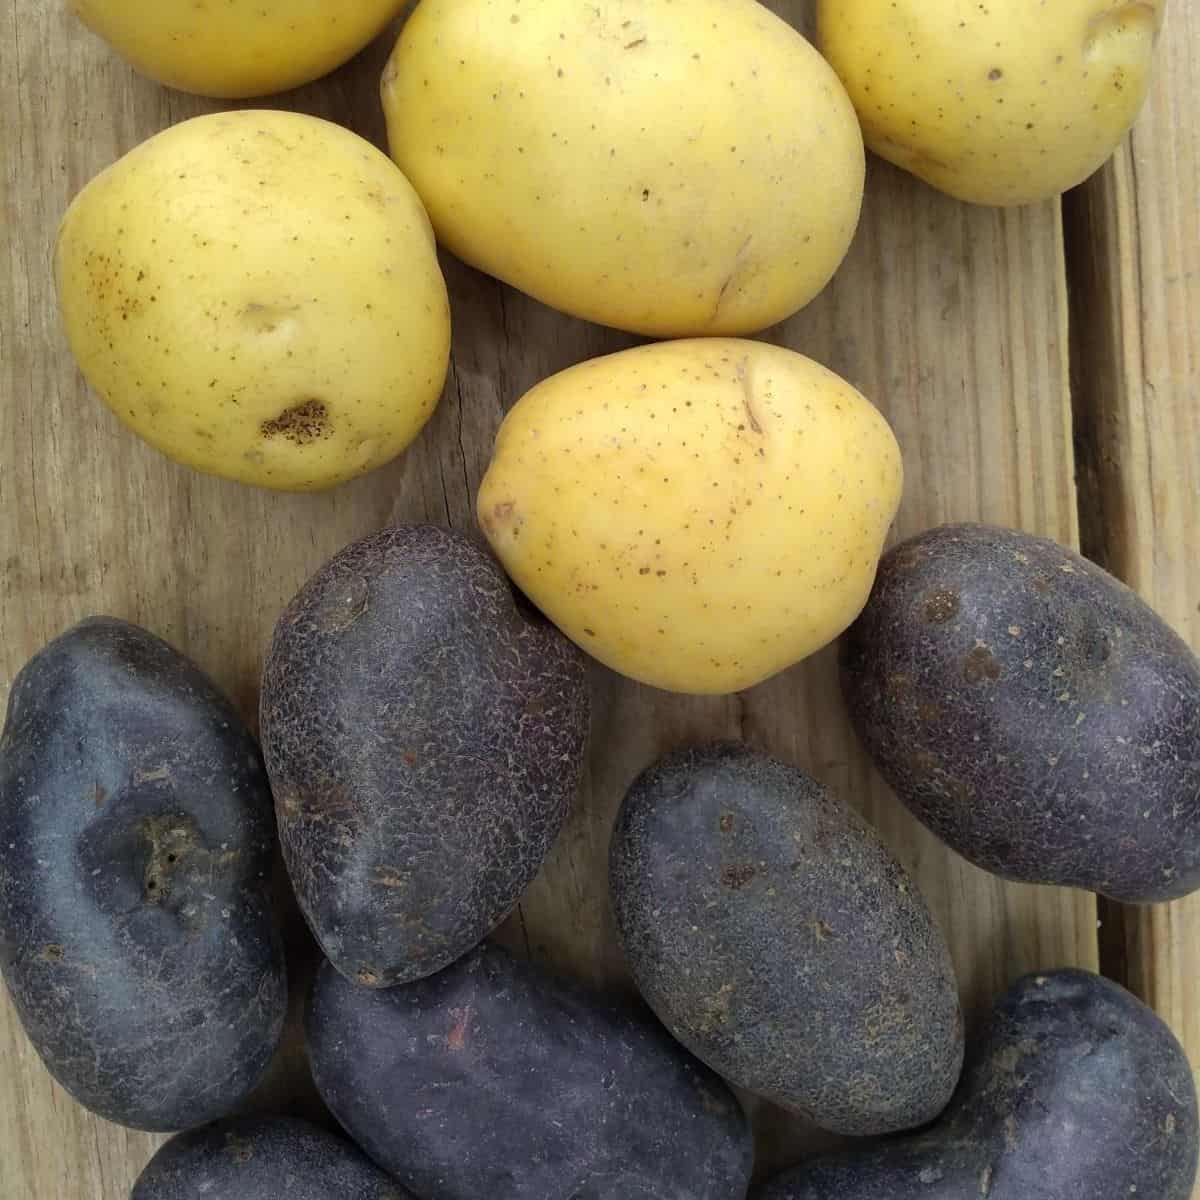 Yellow and purple potatoes on a wood picnic table.